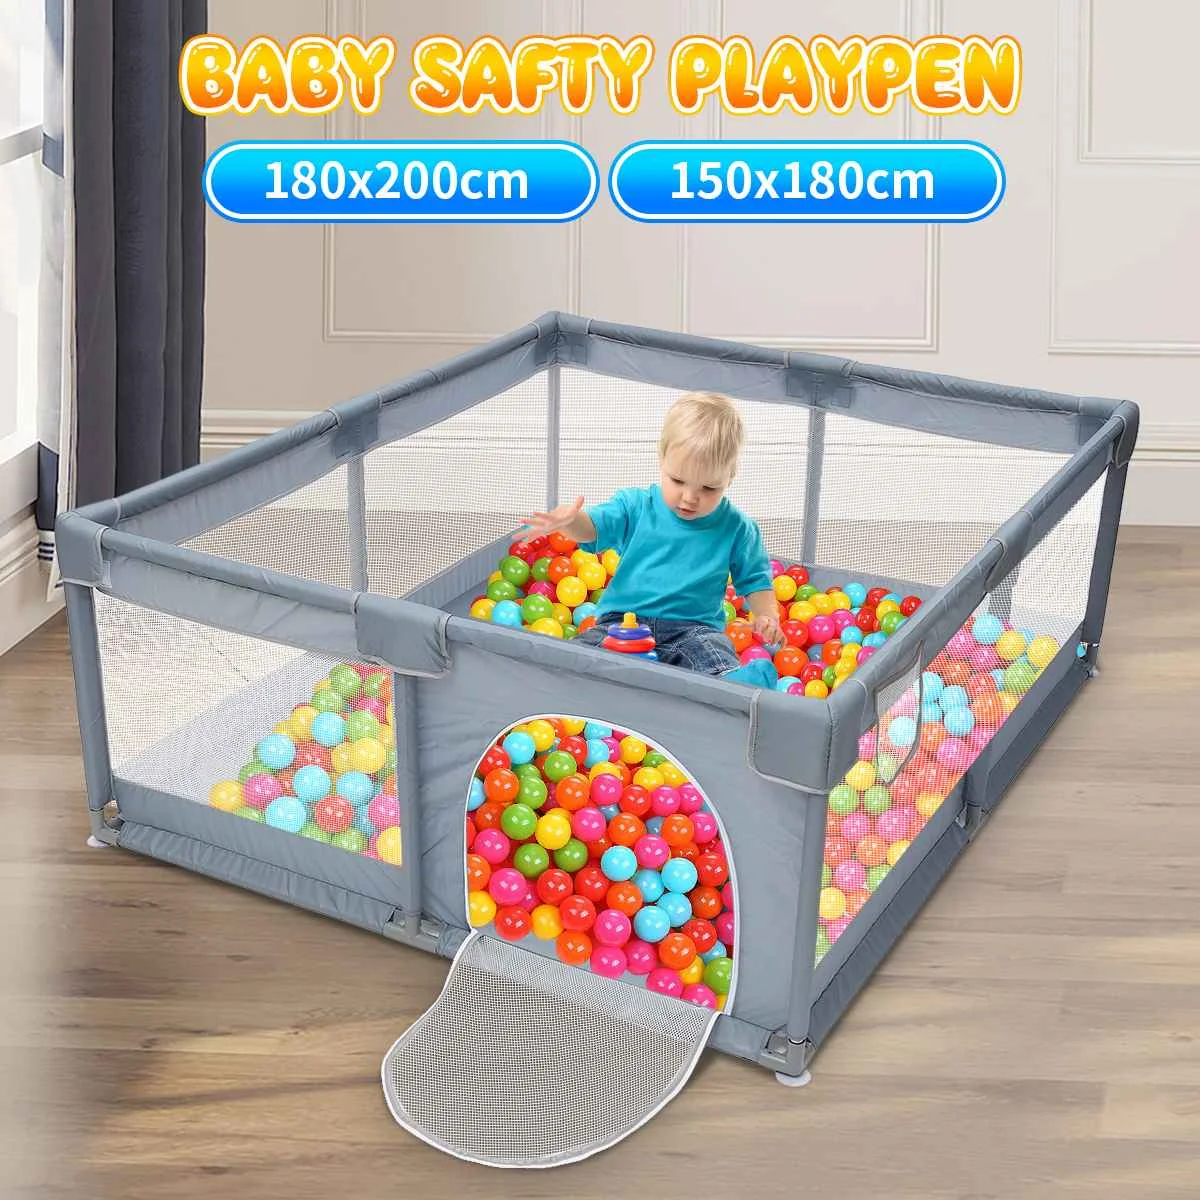 

Playpen for Children Toddler Play Fence Indoor Safety Barrier Playground Park Kids Dry Ball Pool Newborn Guardrail without Balls